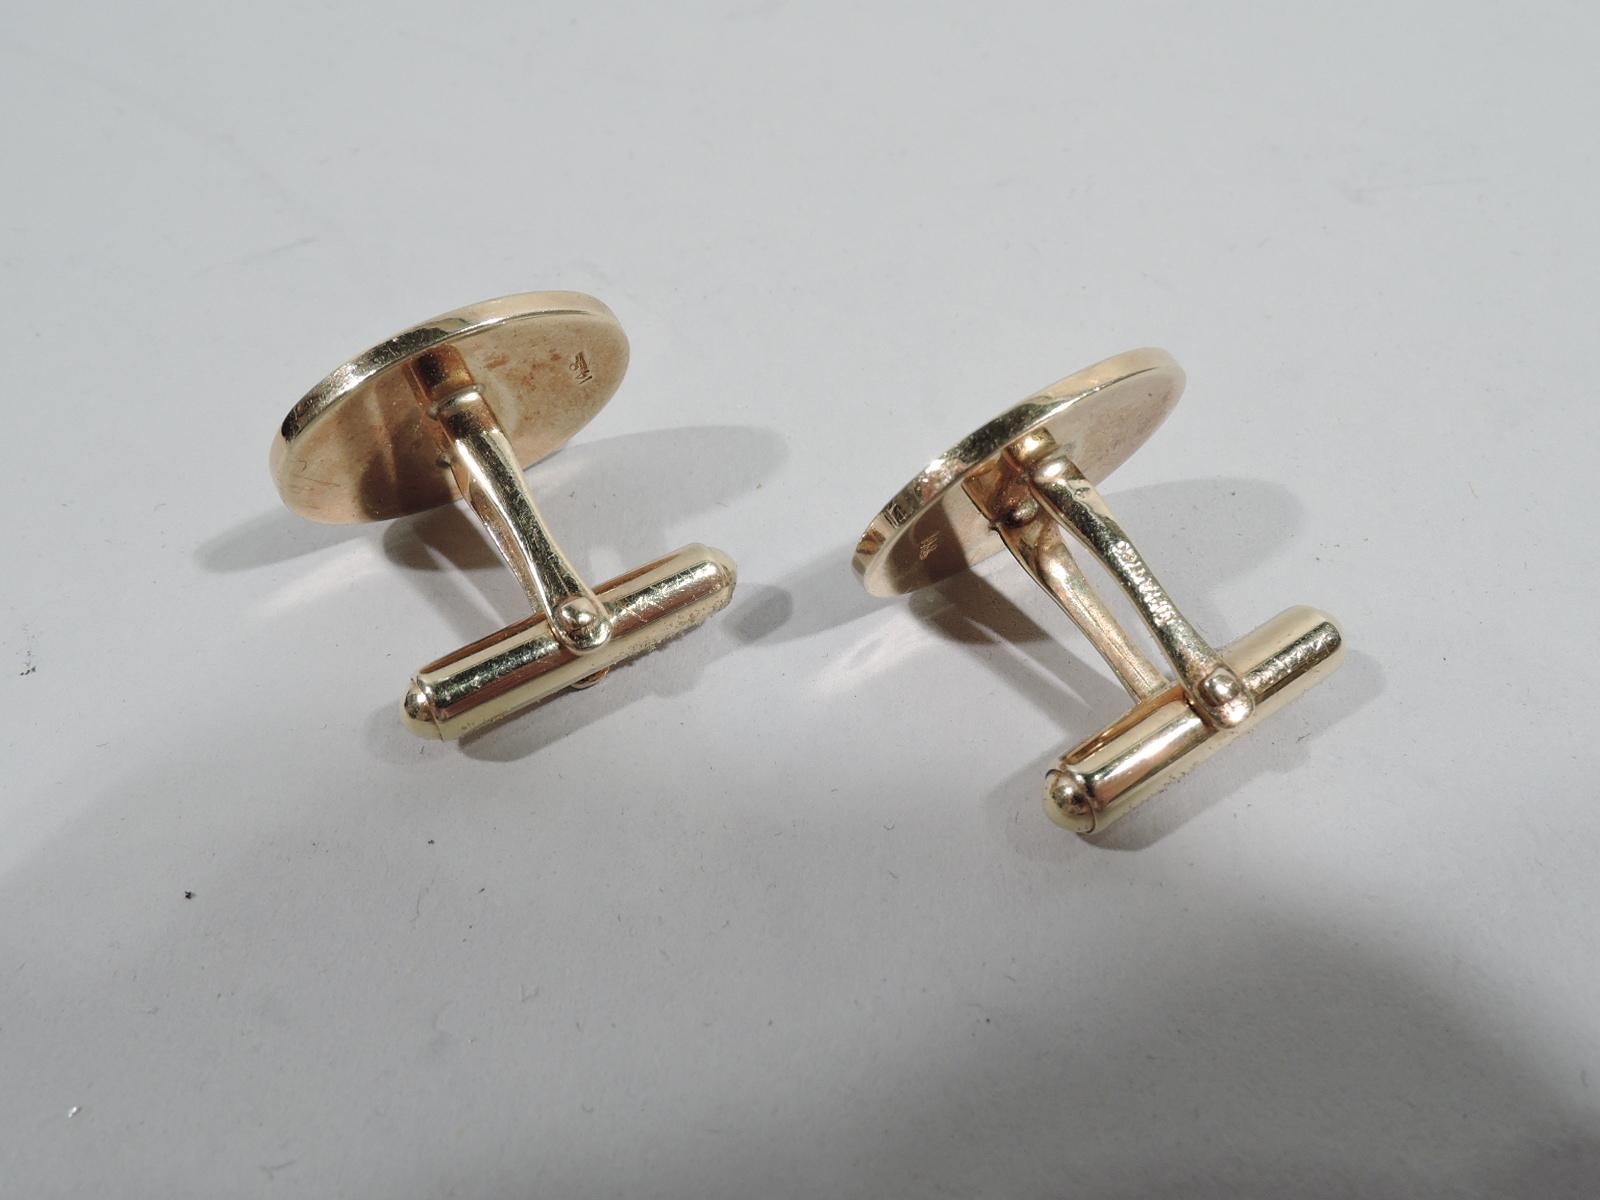 Pair of Classic American 14k gold cufflinks. Engine-turned oval with line border. In leather-bound case with silk lining and fitted velvet. Case top gilt-stamped “Tiffany & Co. / New York”. Cufflinks' marks include “Tiffany & Co.” stamp. Weight